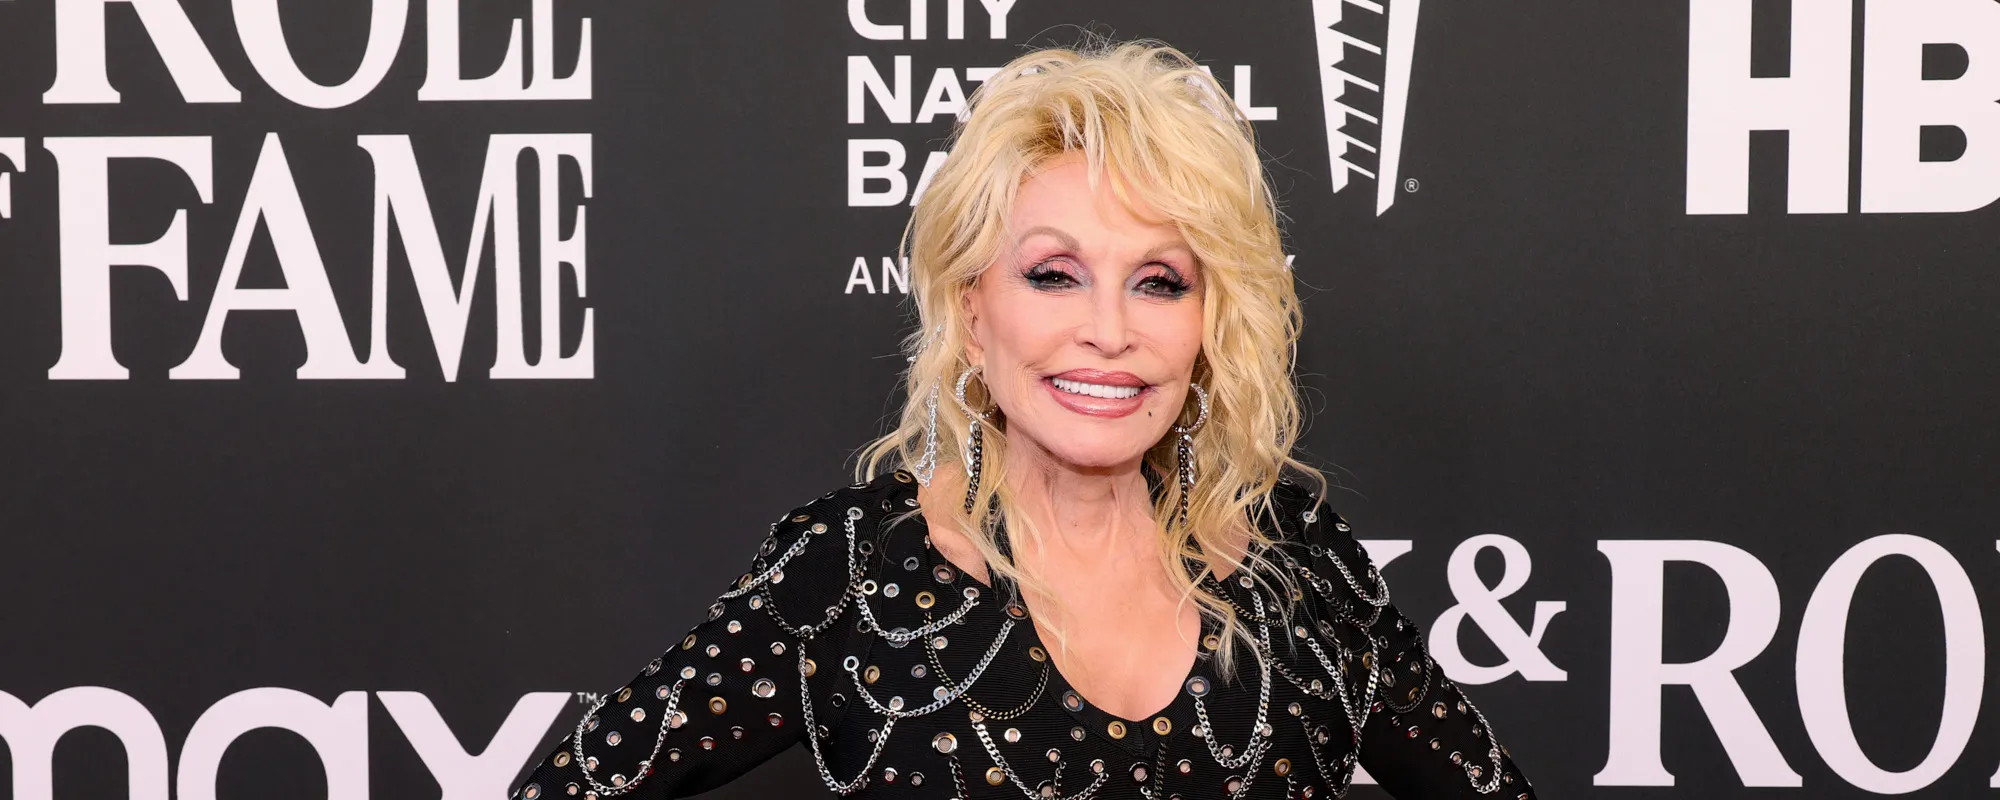 Dolly Parton Inducted Into the Rock & Roll Hall of Fame, Performs New Song “Rockin”—”I’m a Rock Star Now”